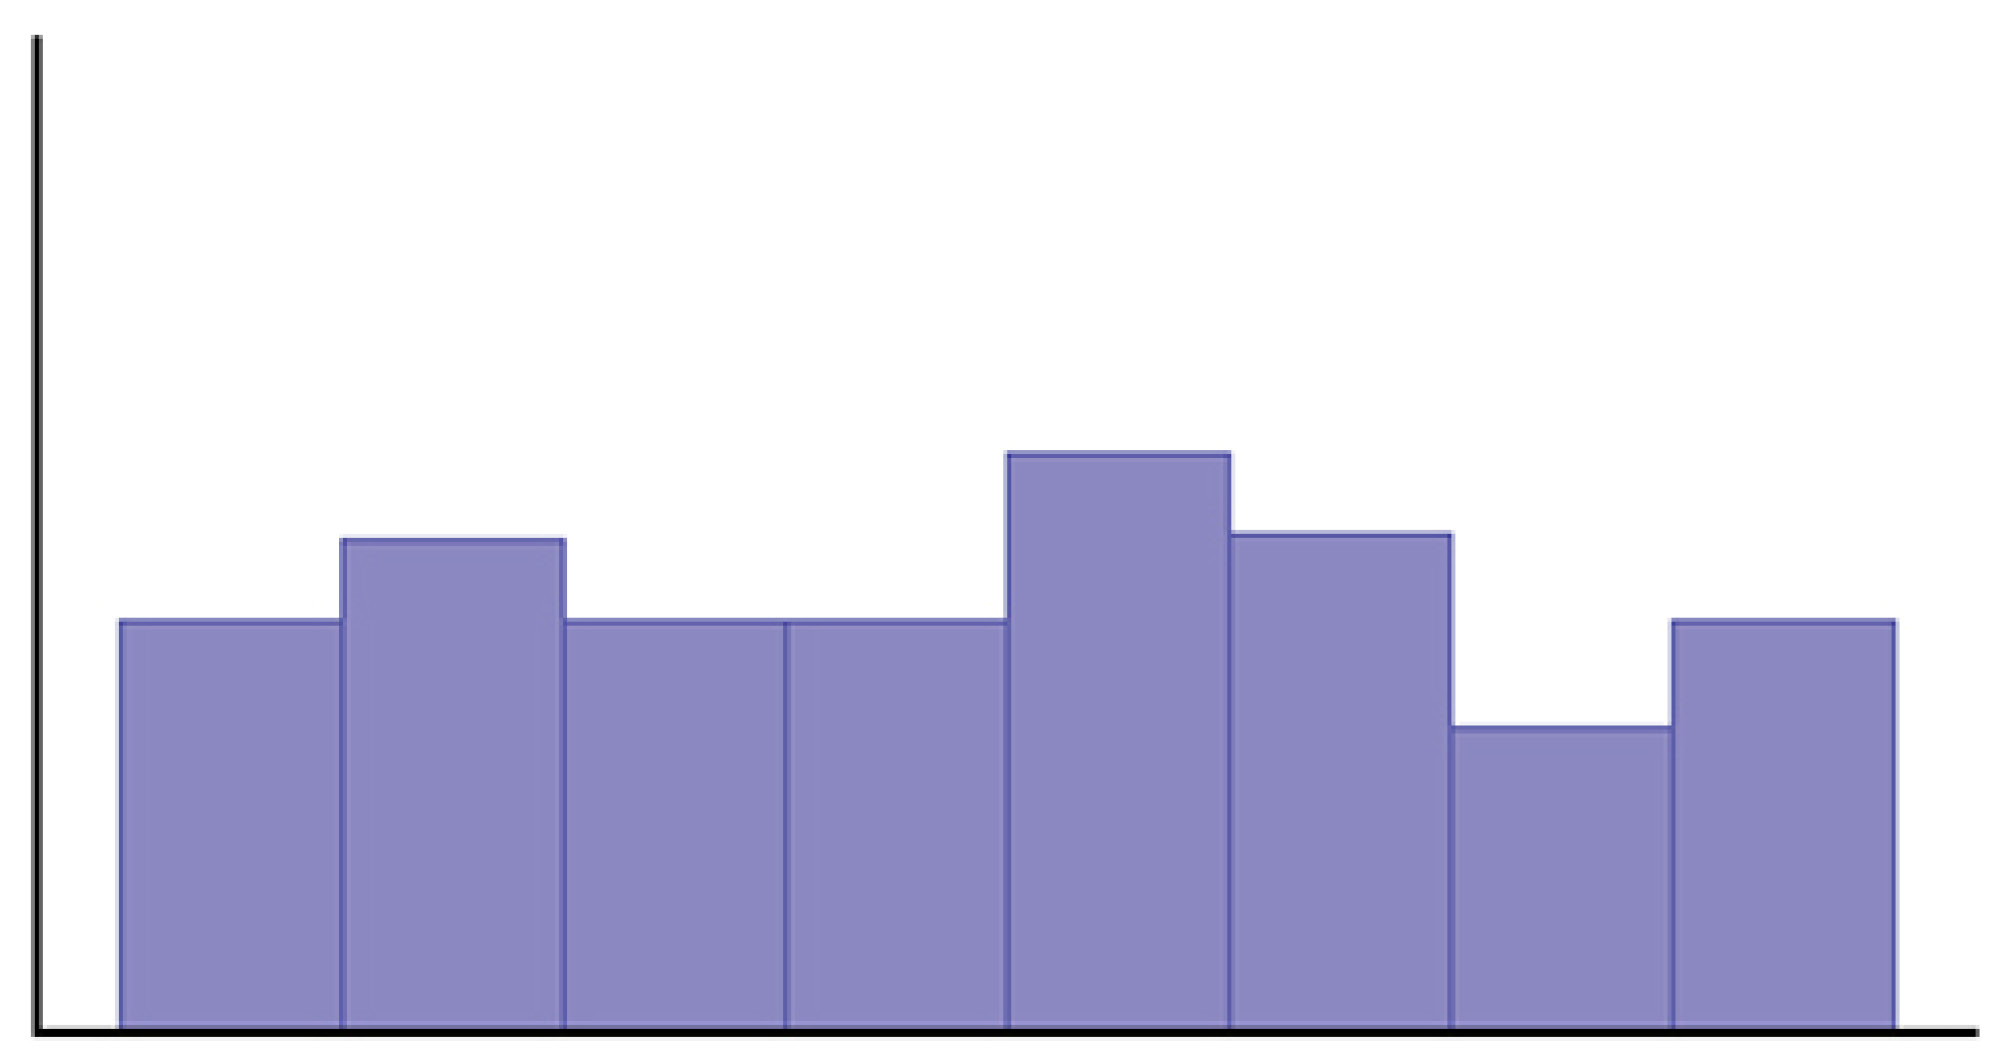 This graph is an unlabeled histogram. The heights of the bars do not vary much across the distribution.